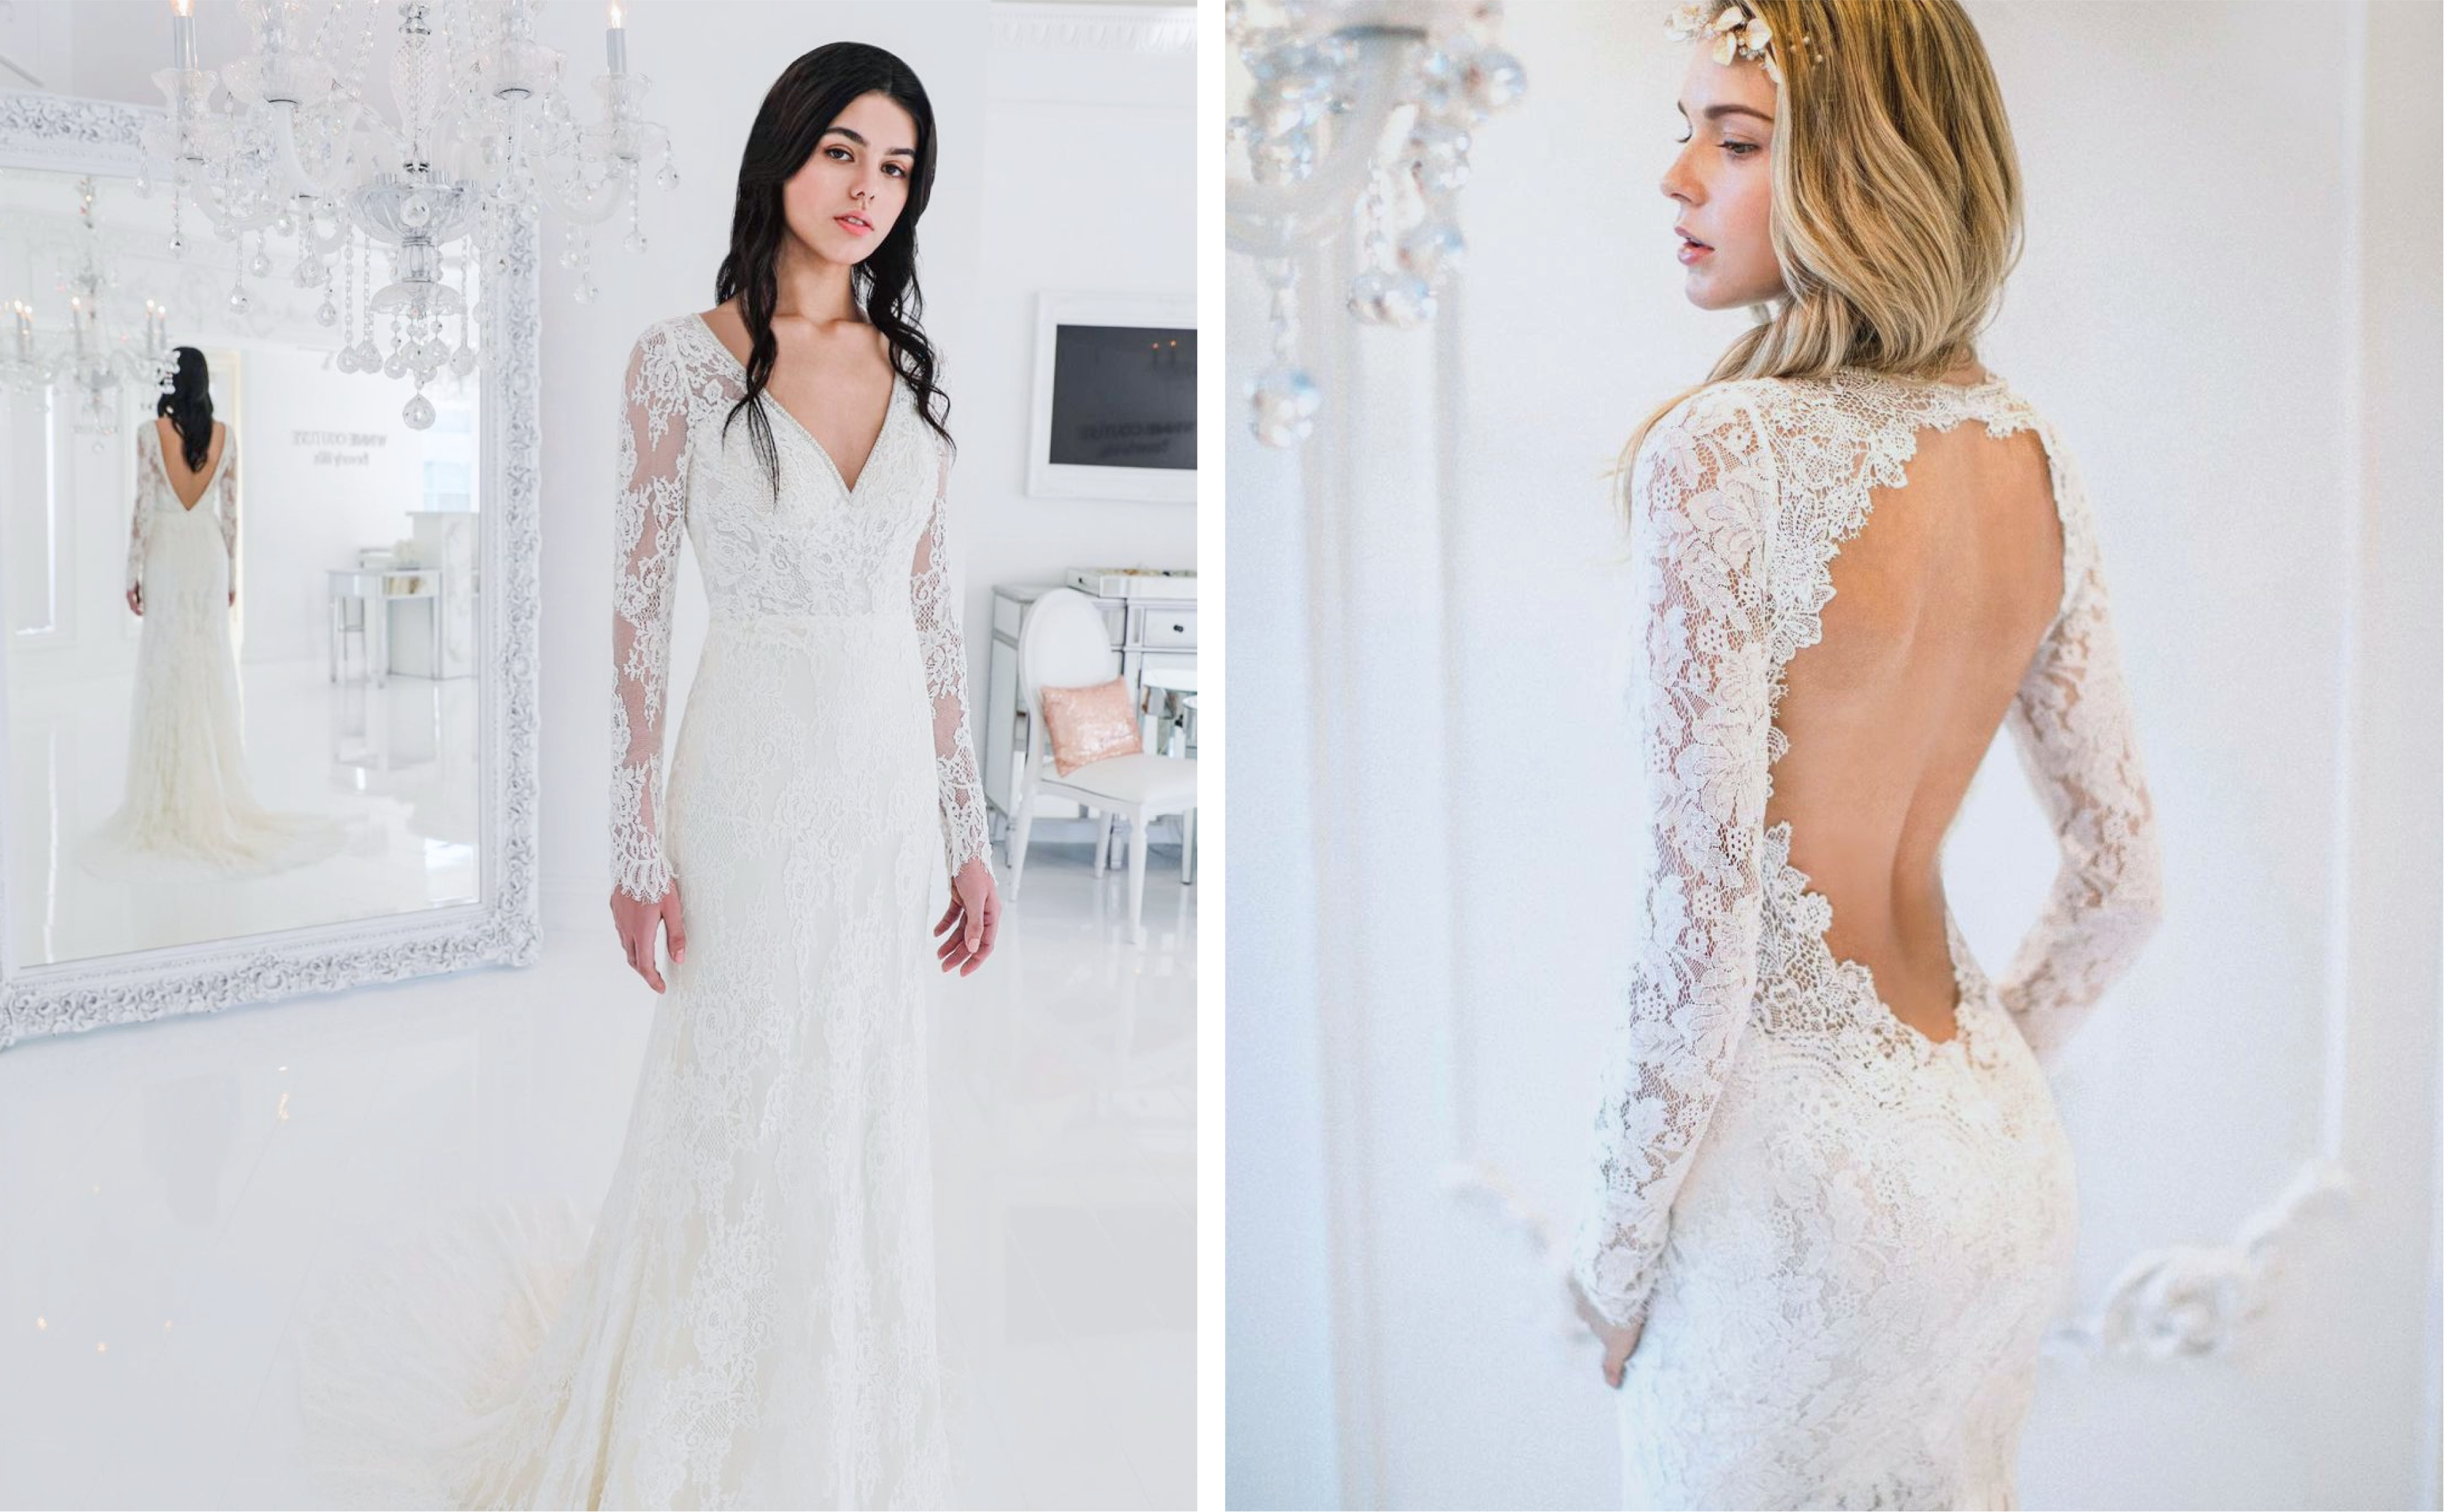 Wedding Dresses Ideal for Boston’s Chilly Charms